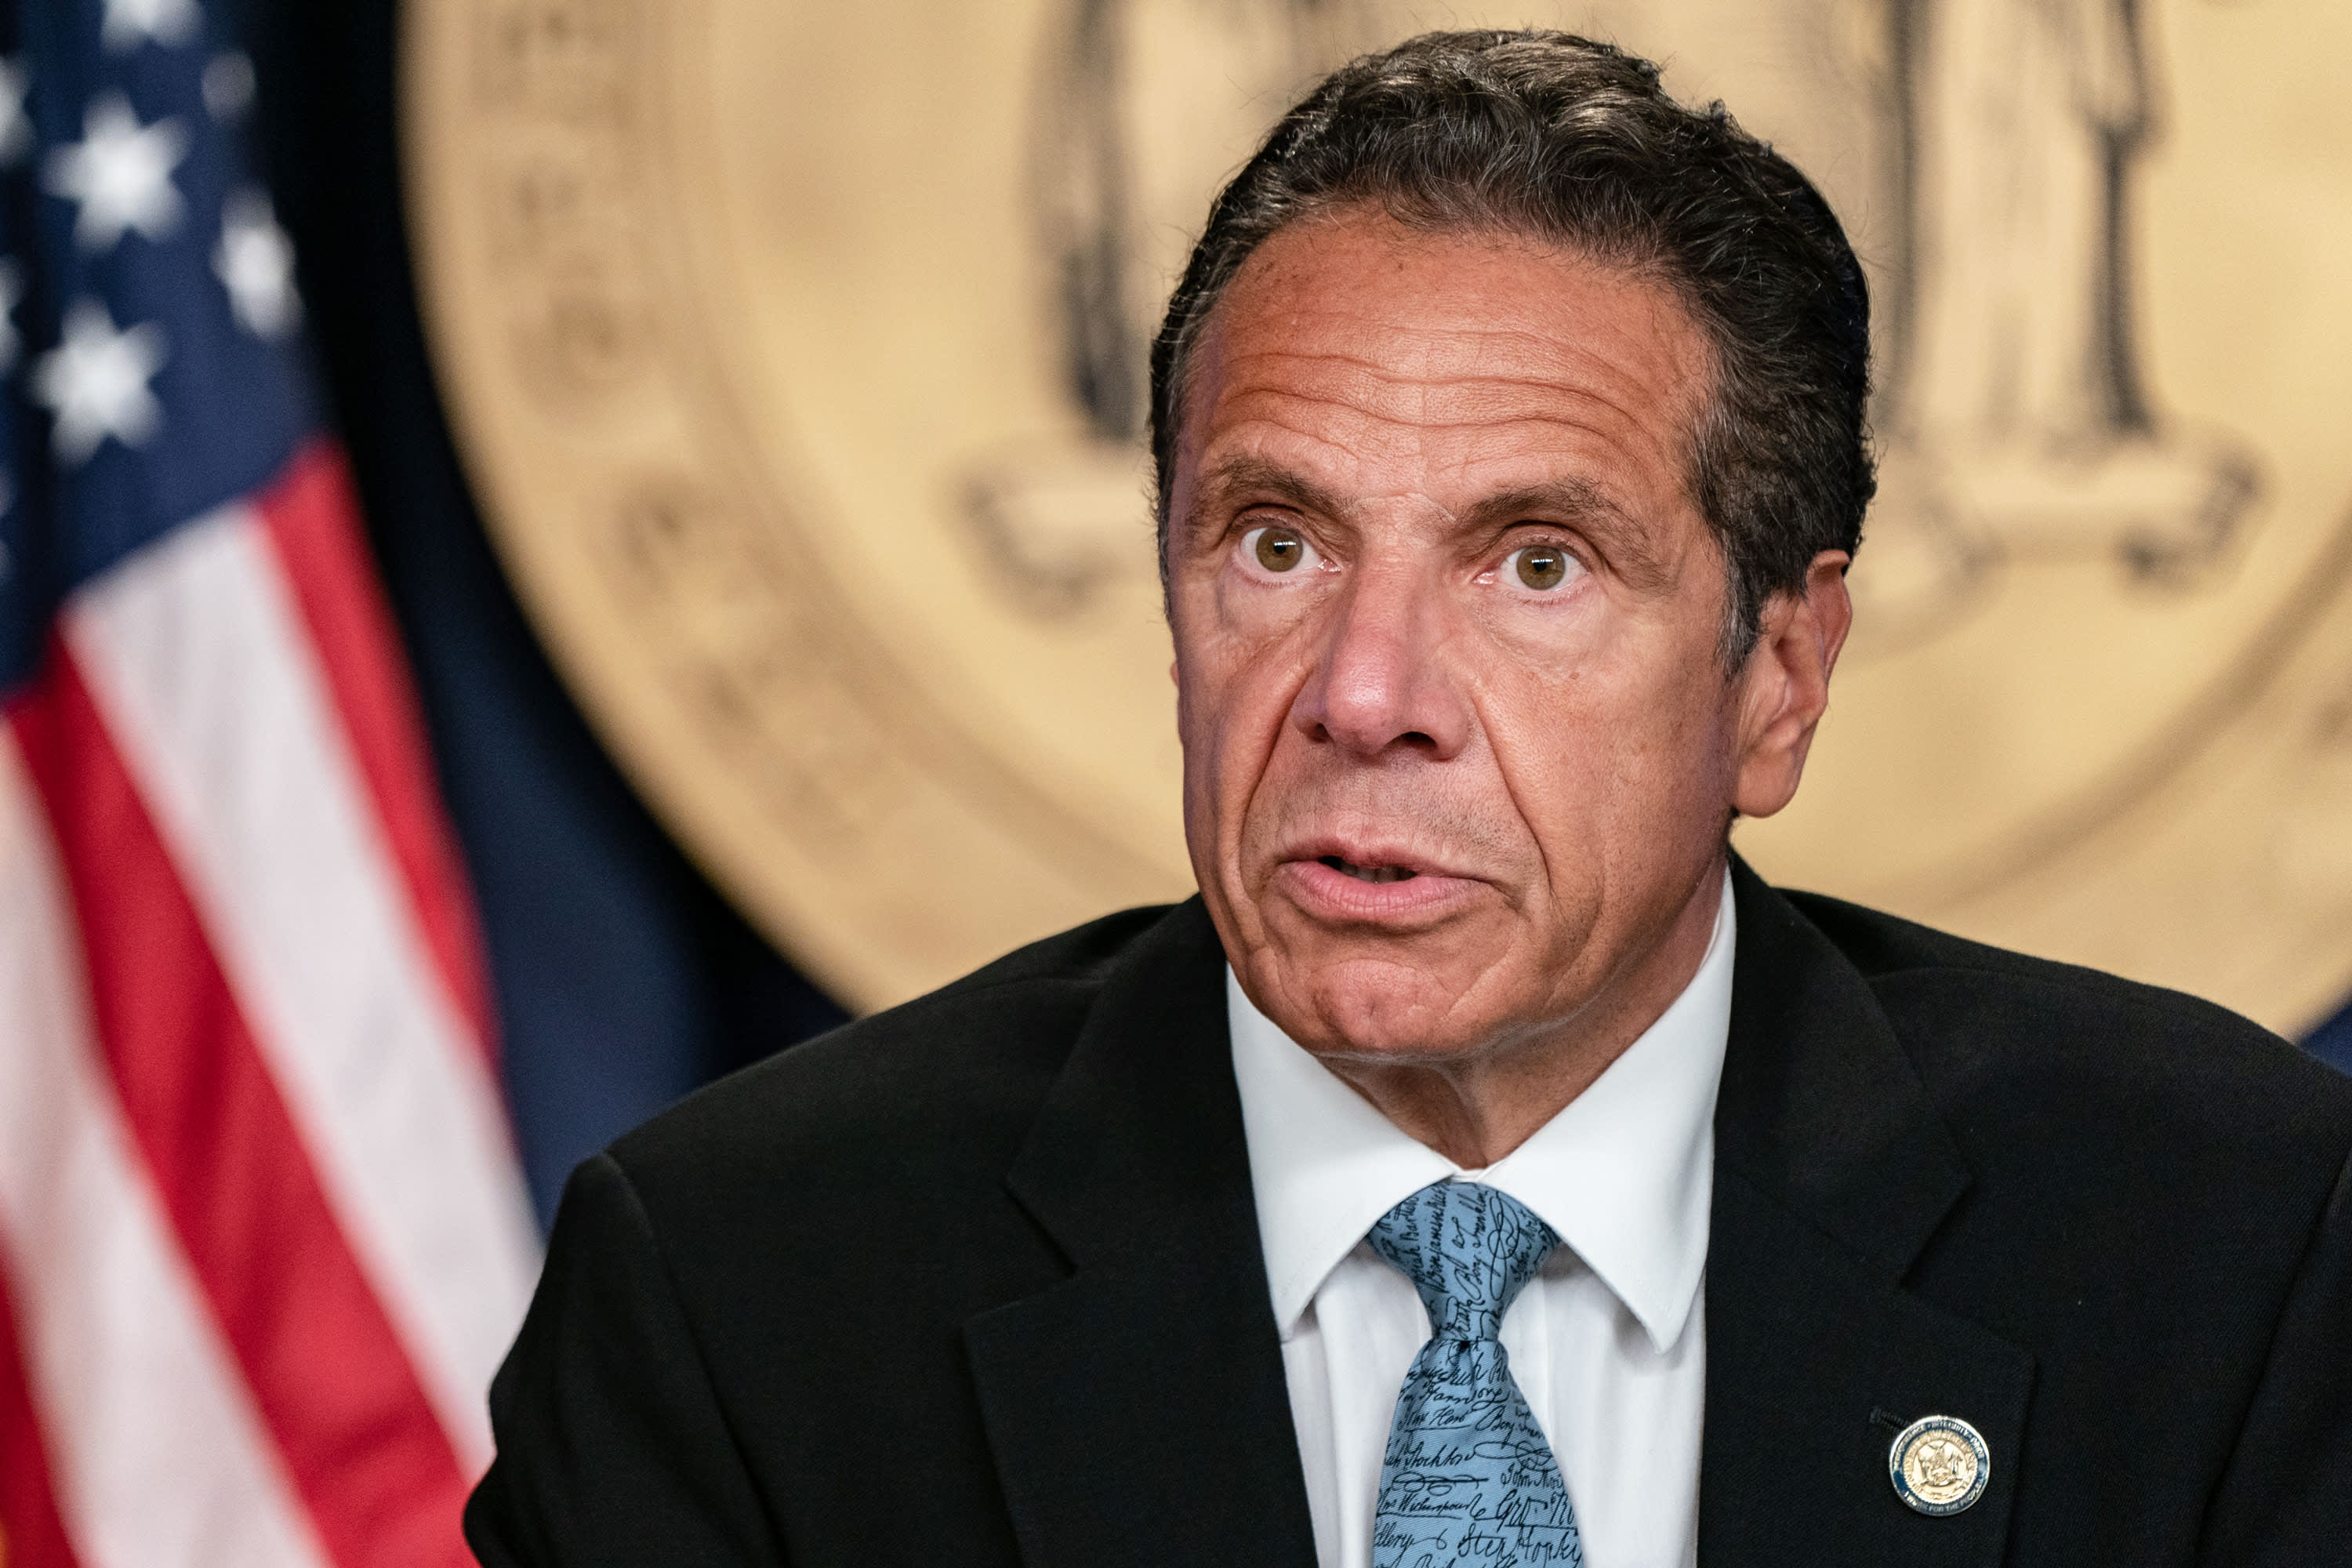 Governor Cuomo’s ‘casual sexism’ undermines equality for all, says author